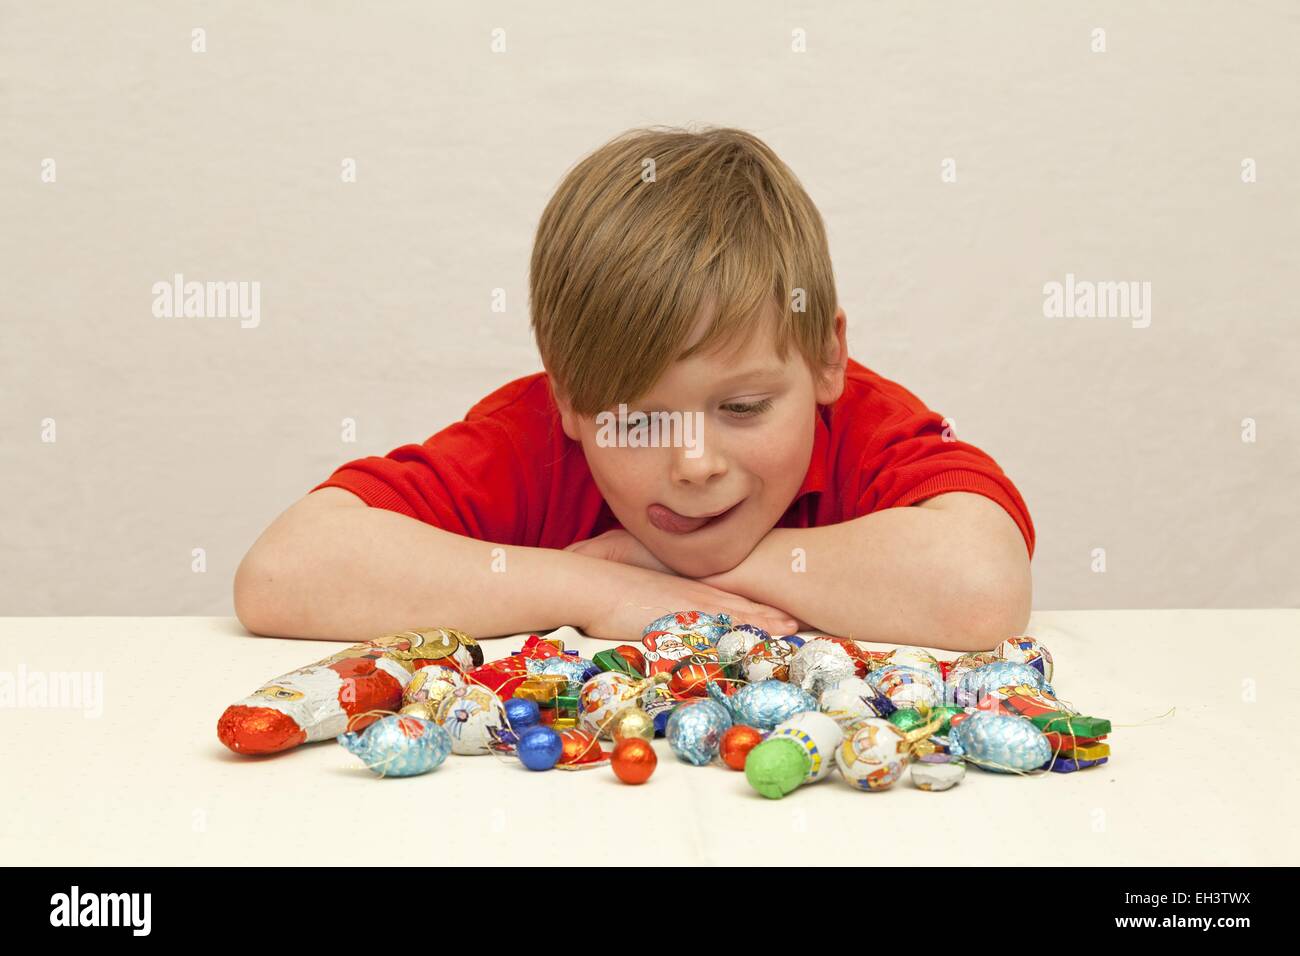 young boy with mouth watering looking at Christmas sweets Stock Photo